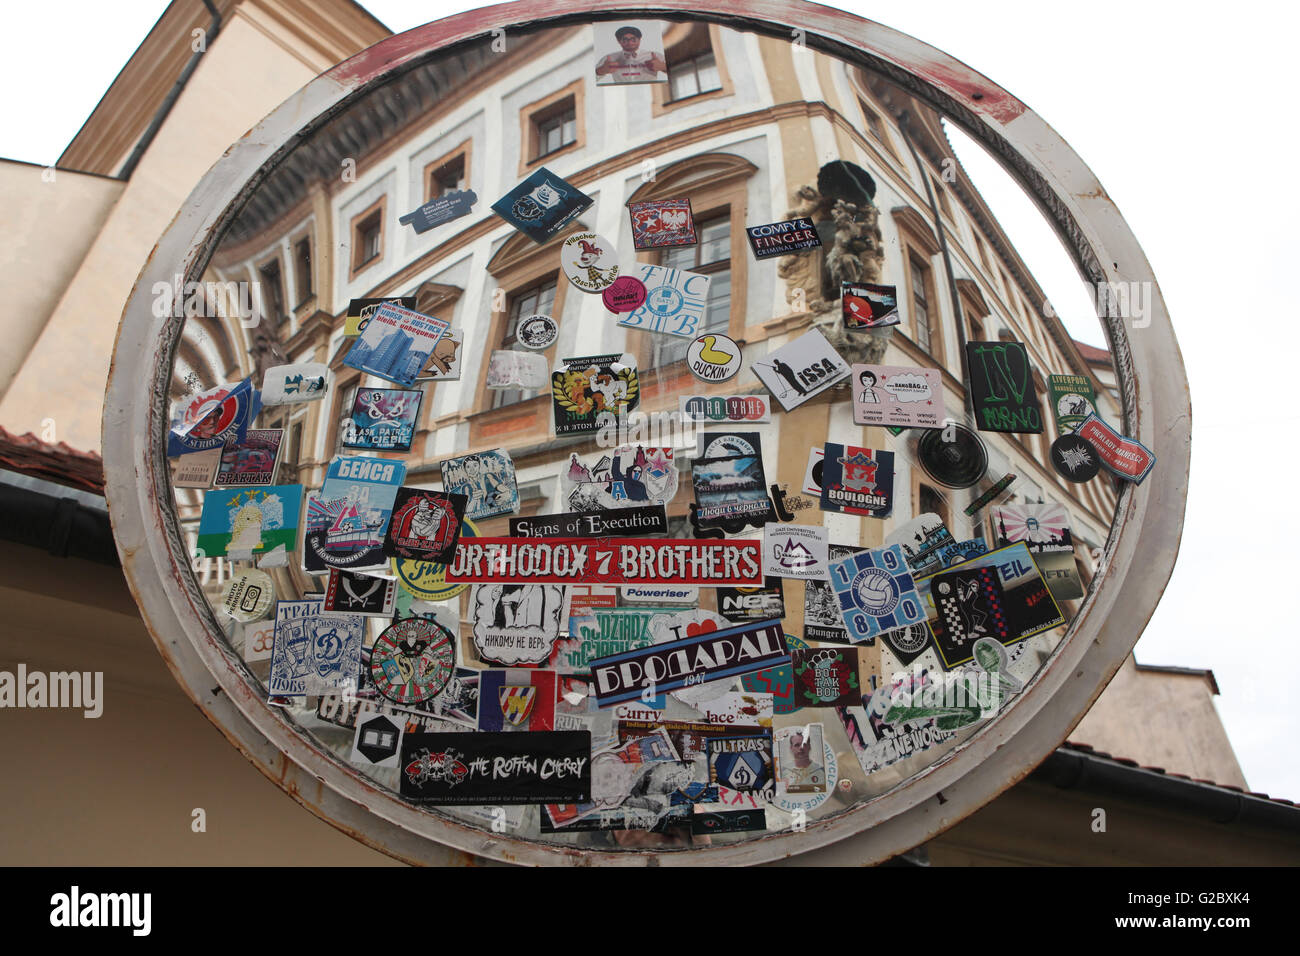 Convex mirror covered with stickers at Hradcanske Square in Prague, Czech Republic. Stock Photo